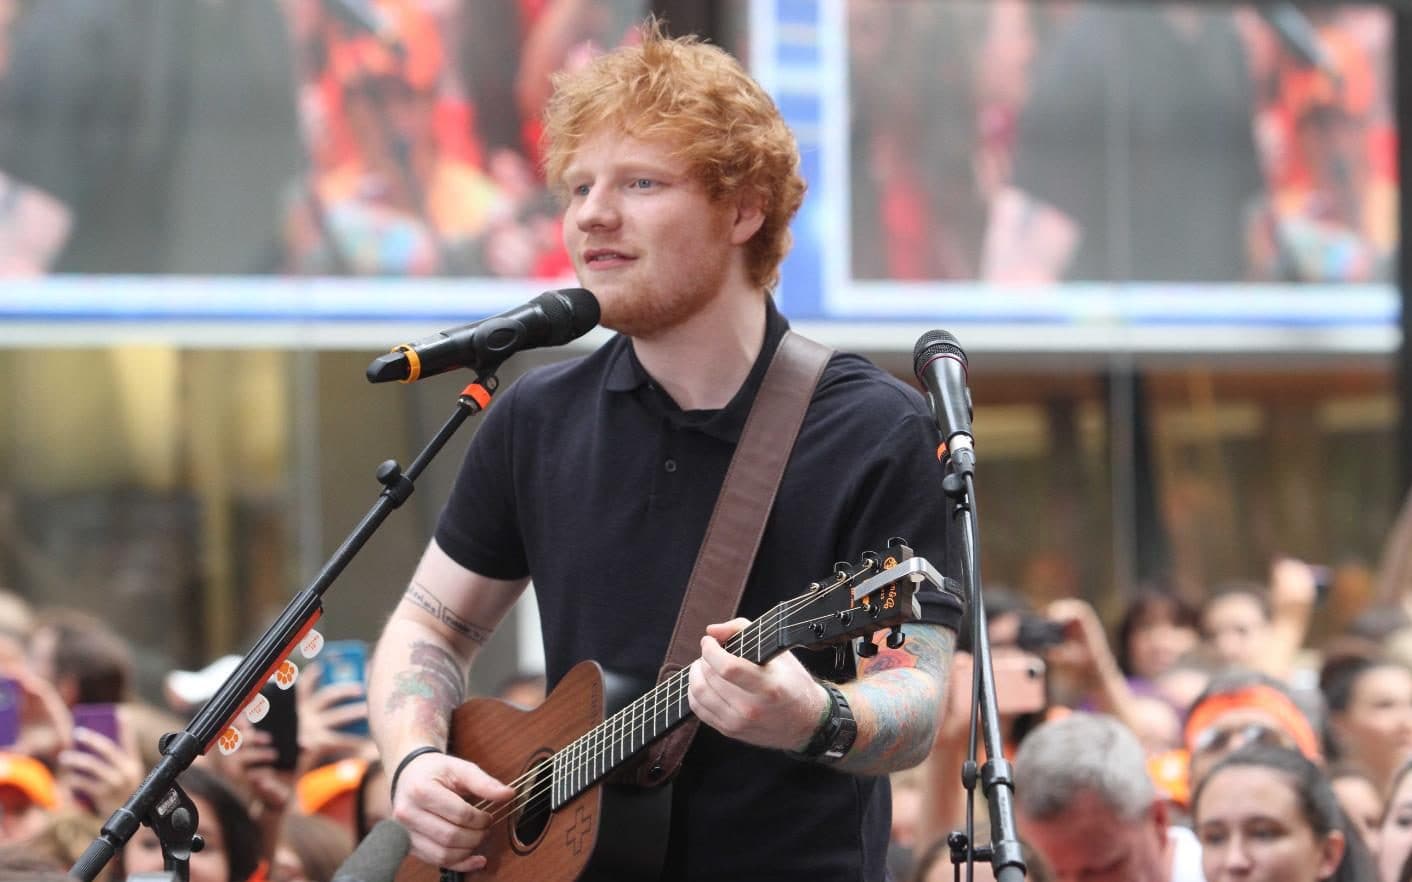 Ed Sheeran Earns Rare Second Diamond Certification With ‘Shape of You’